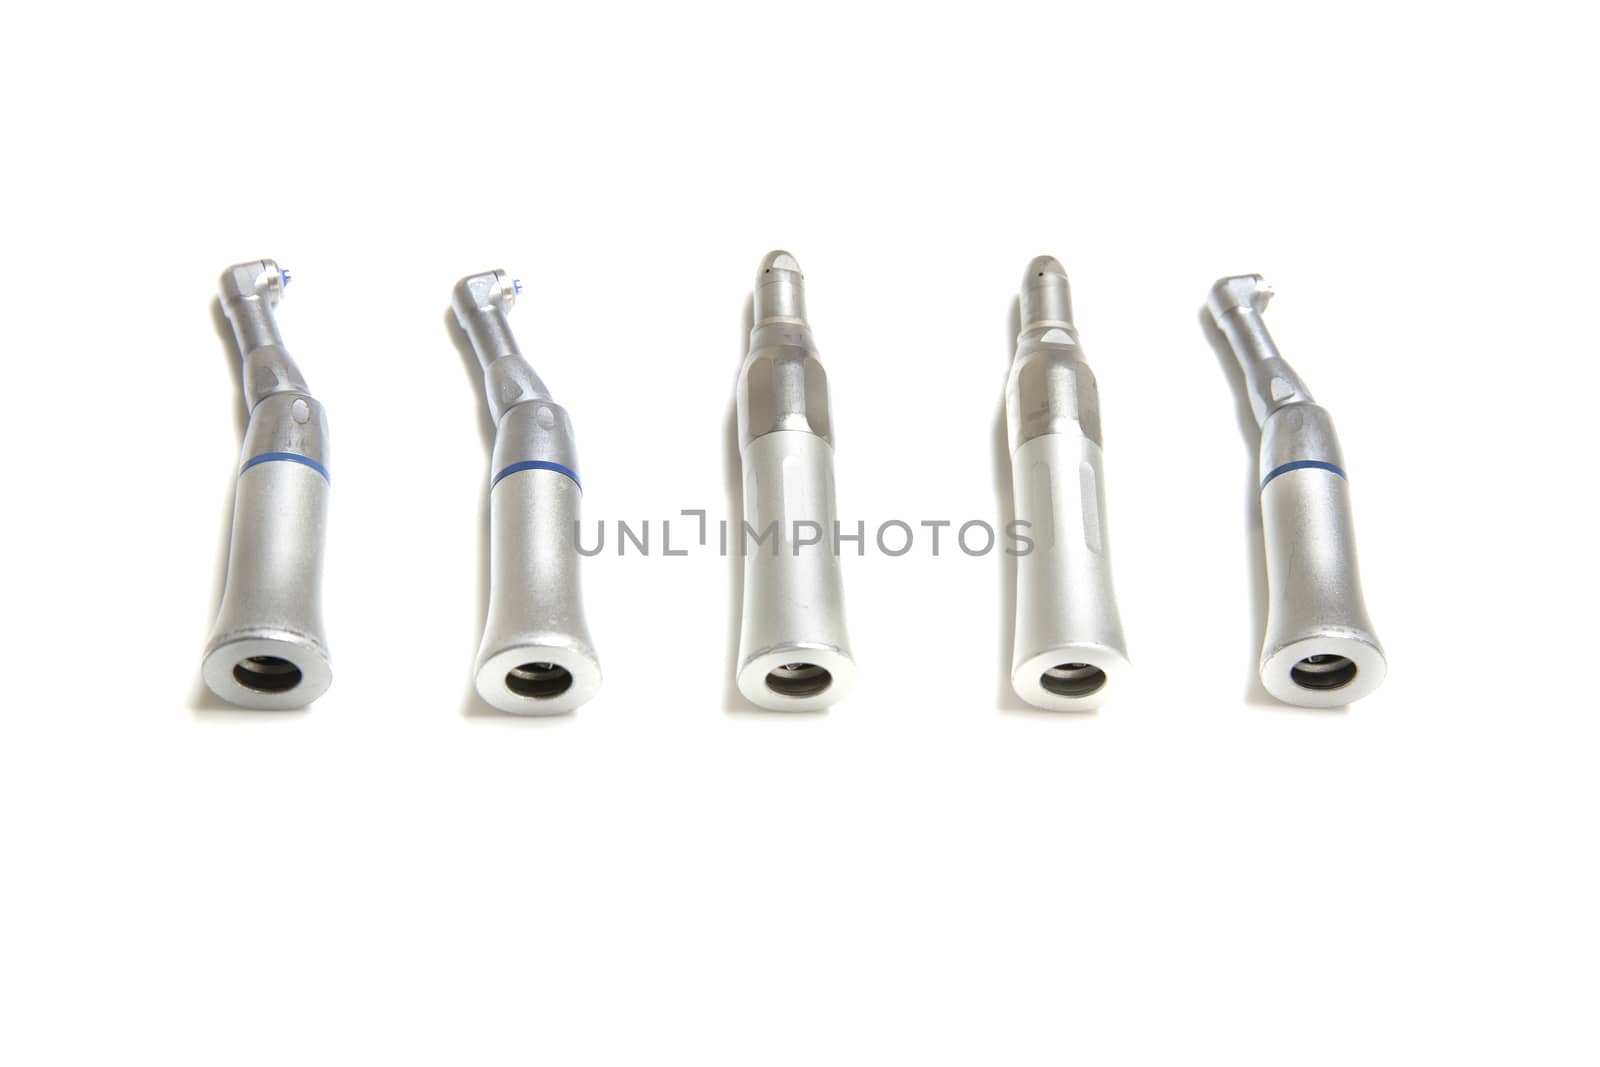 Dental drills isolated on white background.